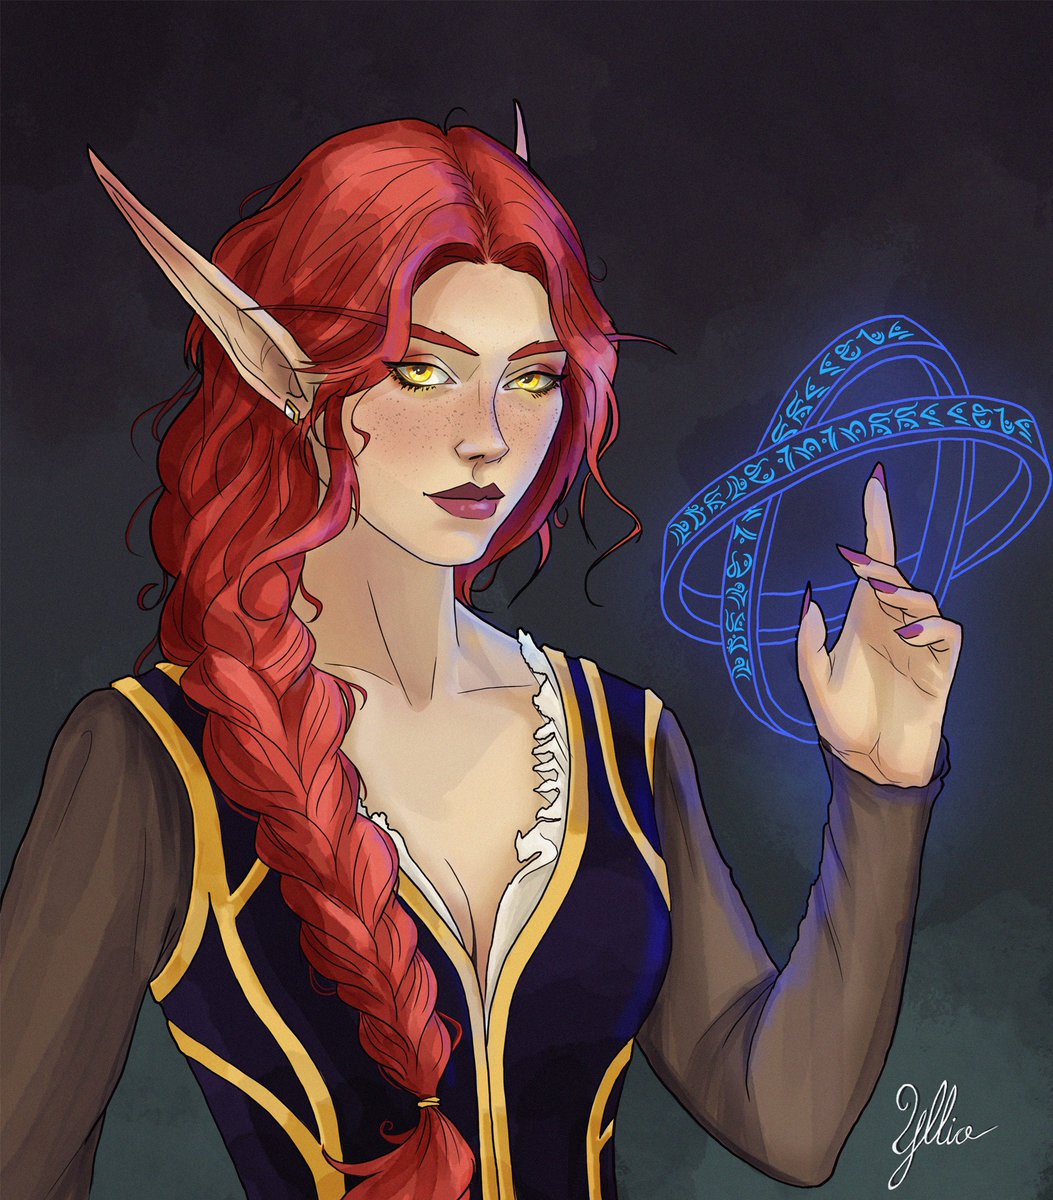 Hi everyone!

This is Idril Susurra Alba, a sin'dorei artificer wizard.
Commission for @Idril_Susurra

I hope you like it! 🩷

#bloodelf #Wow #worldofwarcraft #sindorei #elf #wizard #fantasy #fantasyart #commission #portrait #illustration #magic #SupportHumanArtists #mage #runes